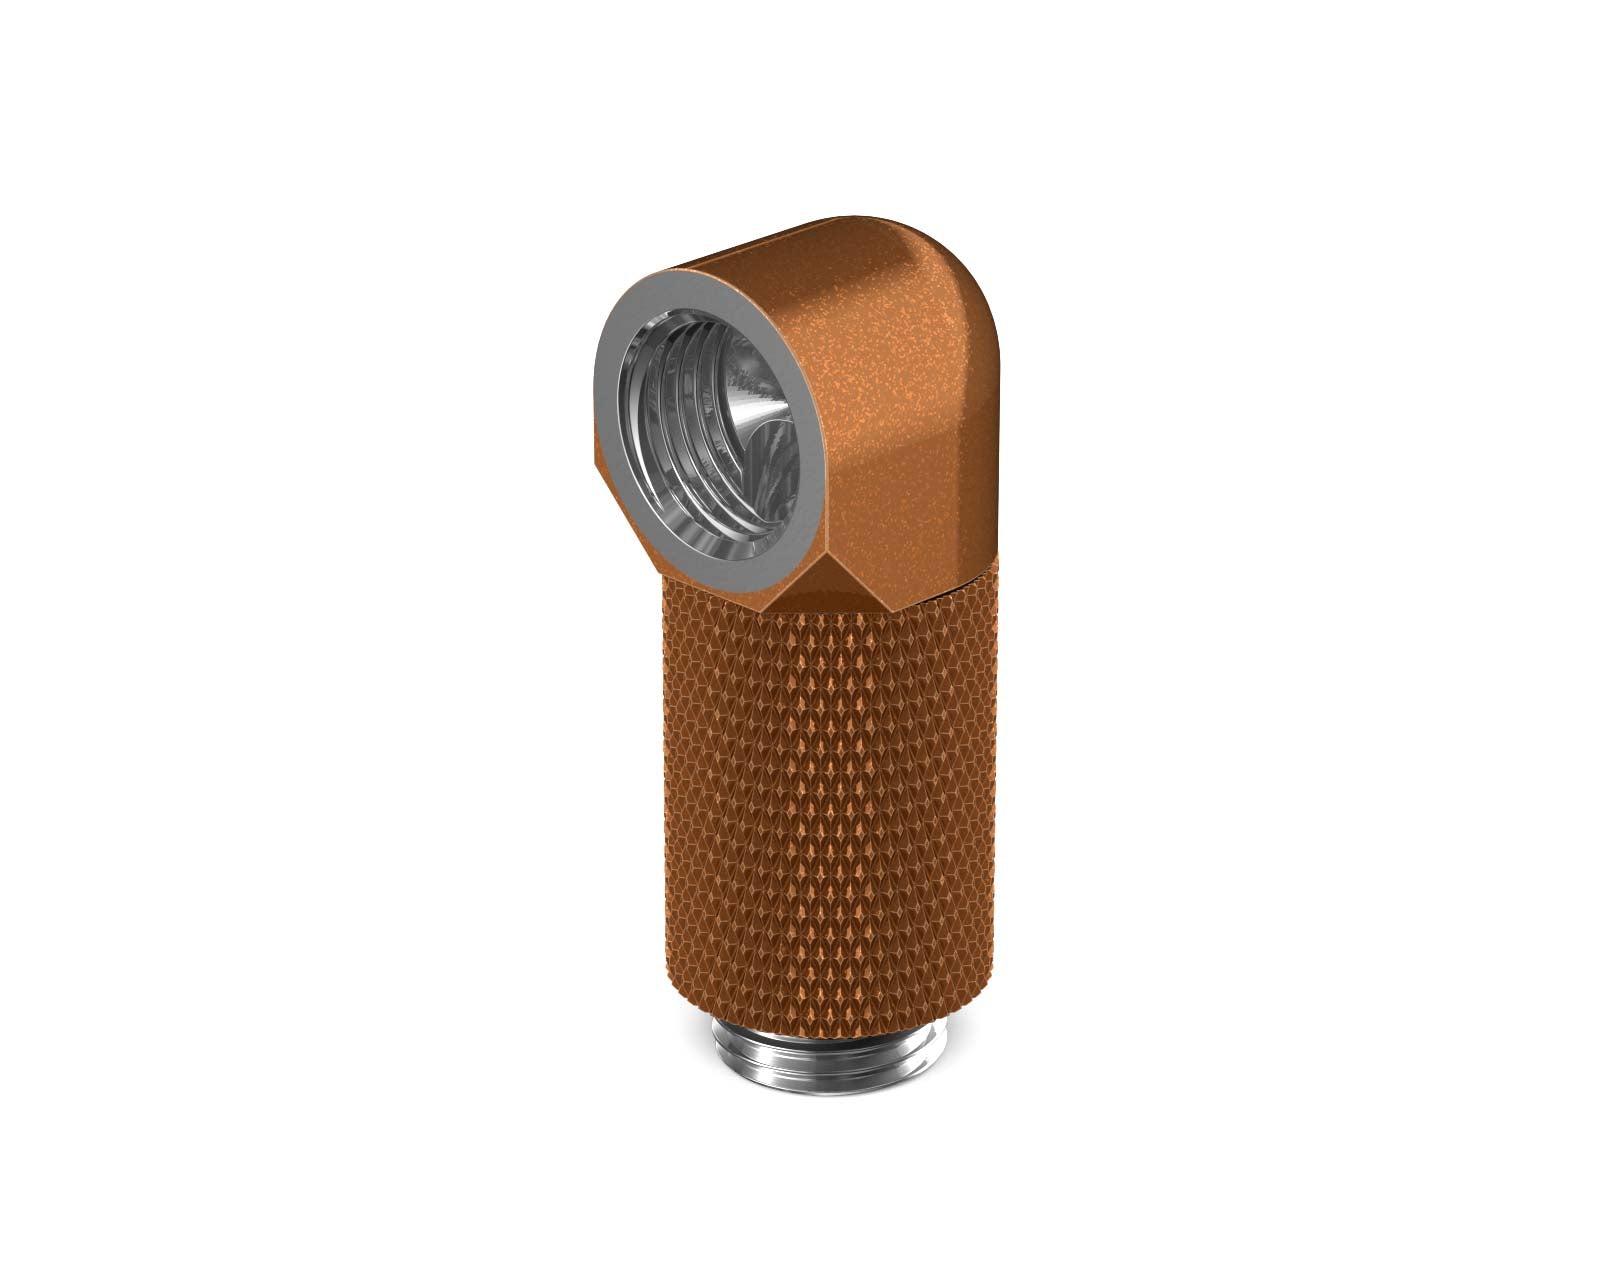 PrimoChill Male to Female G 1/4in. 90 Degree SX Rotary 25mm Extension Elbow Fitting - PrimoChill - KEEPING IT COOL Copper